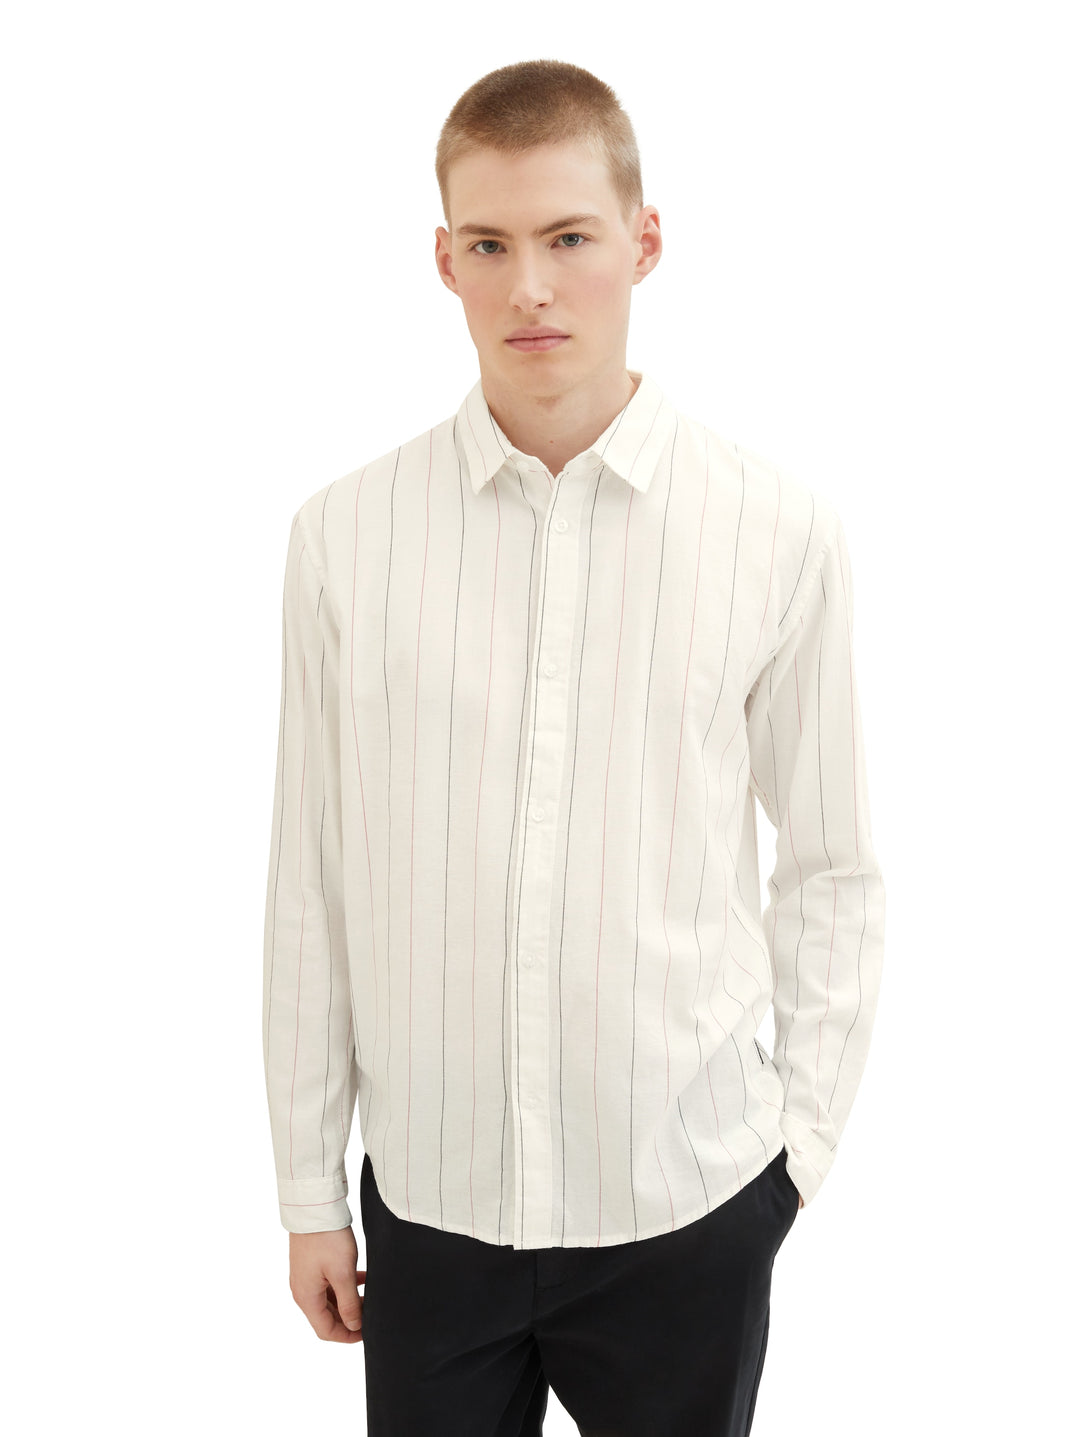 RELAXED STRIPED OXFORD SHIRT